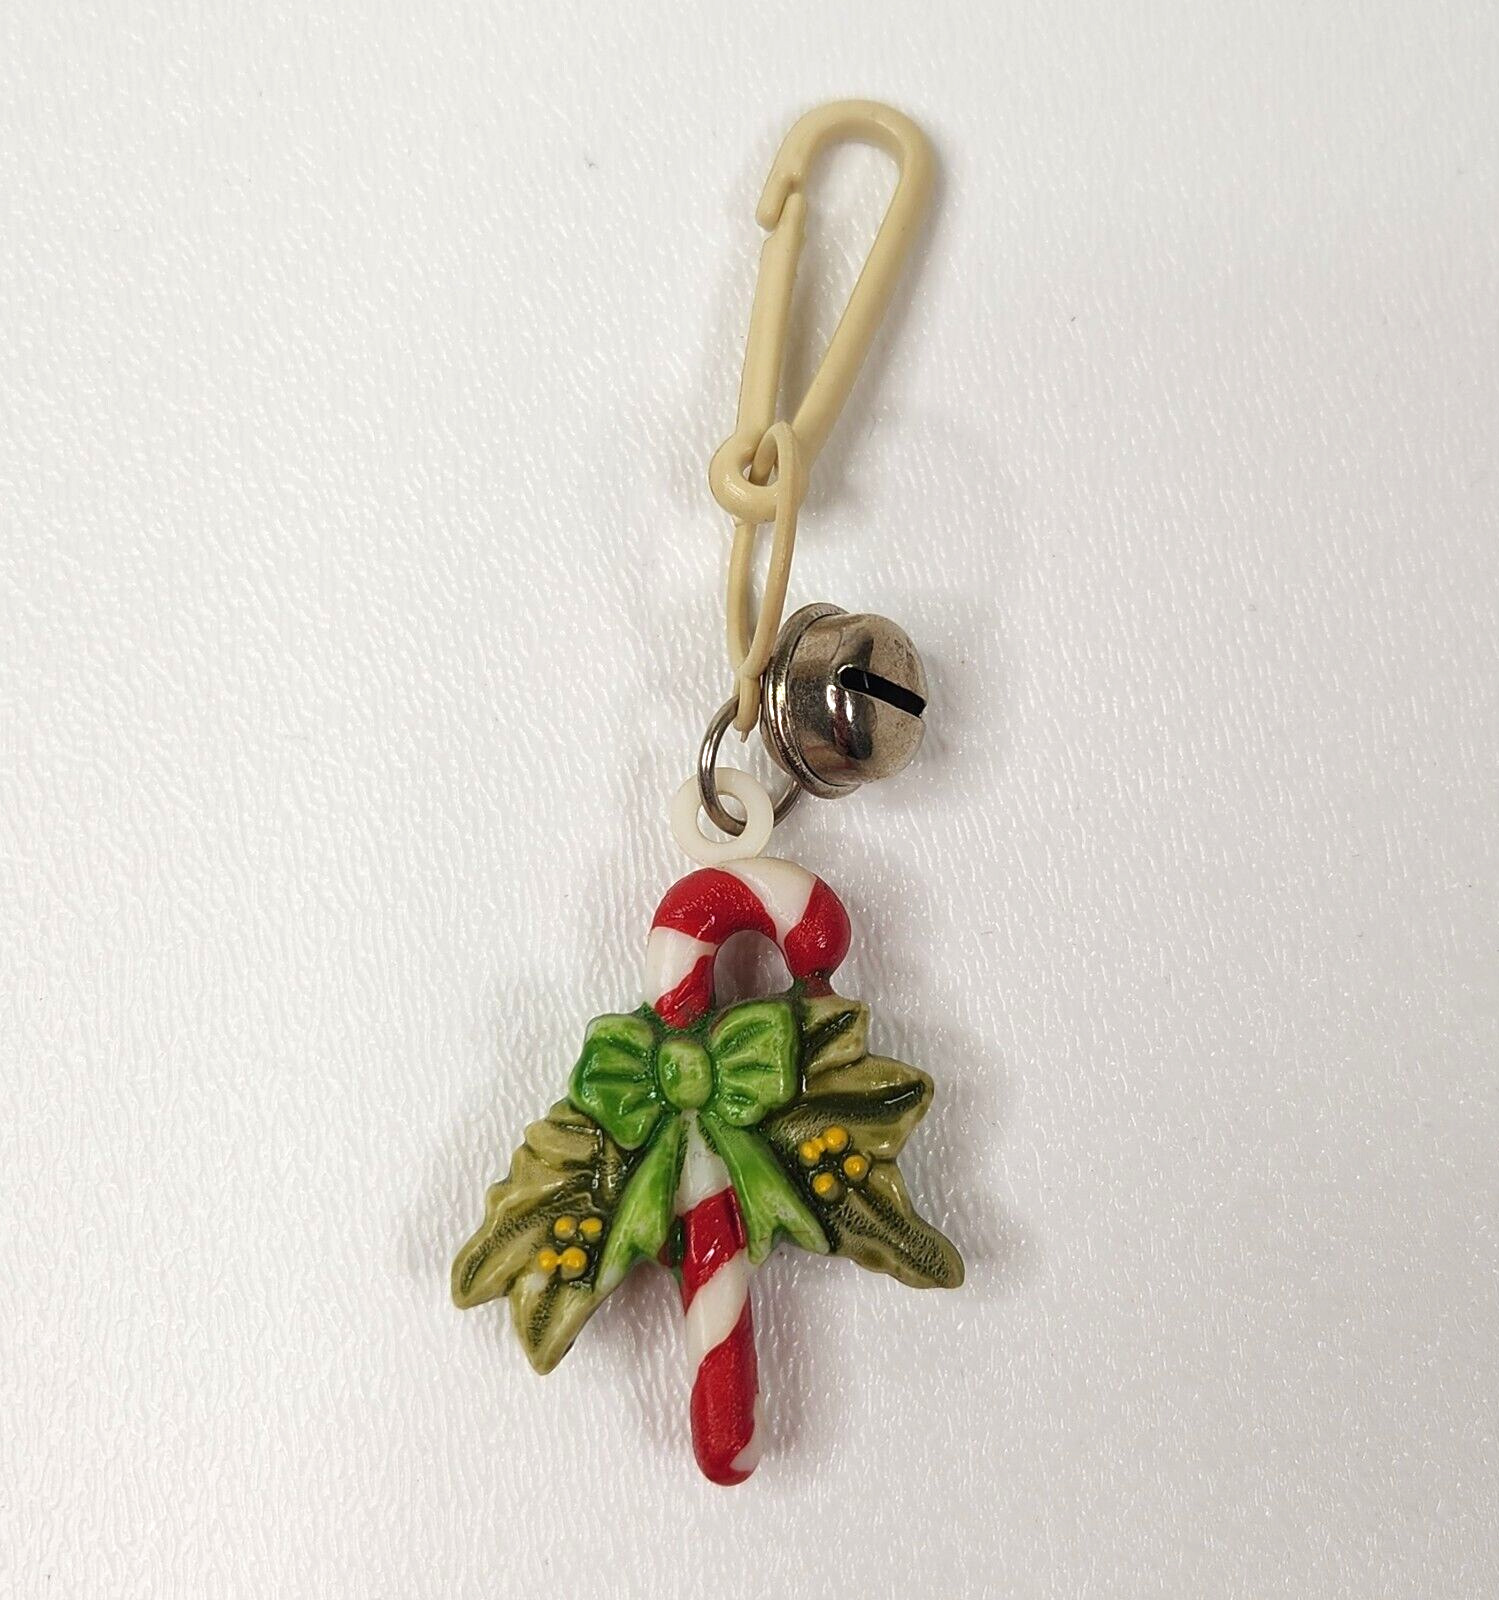 Vintage 1980s Plastic Bell Charm Candy Cane Christmas For 80s Necklace